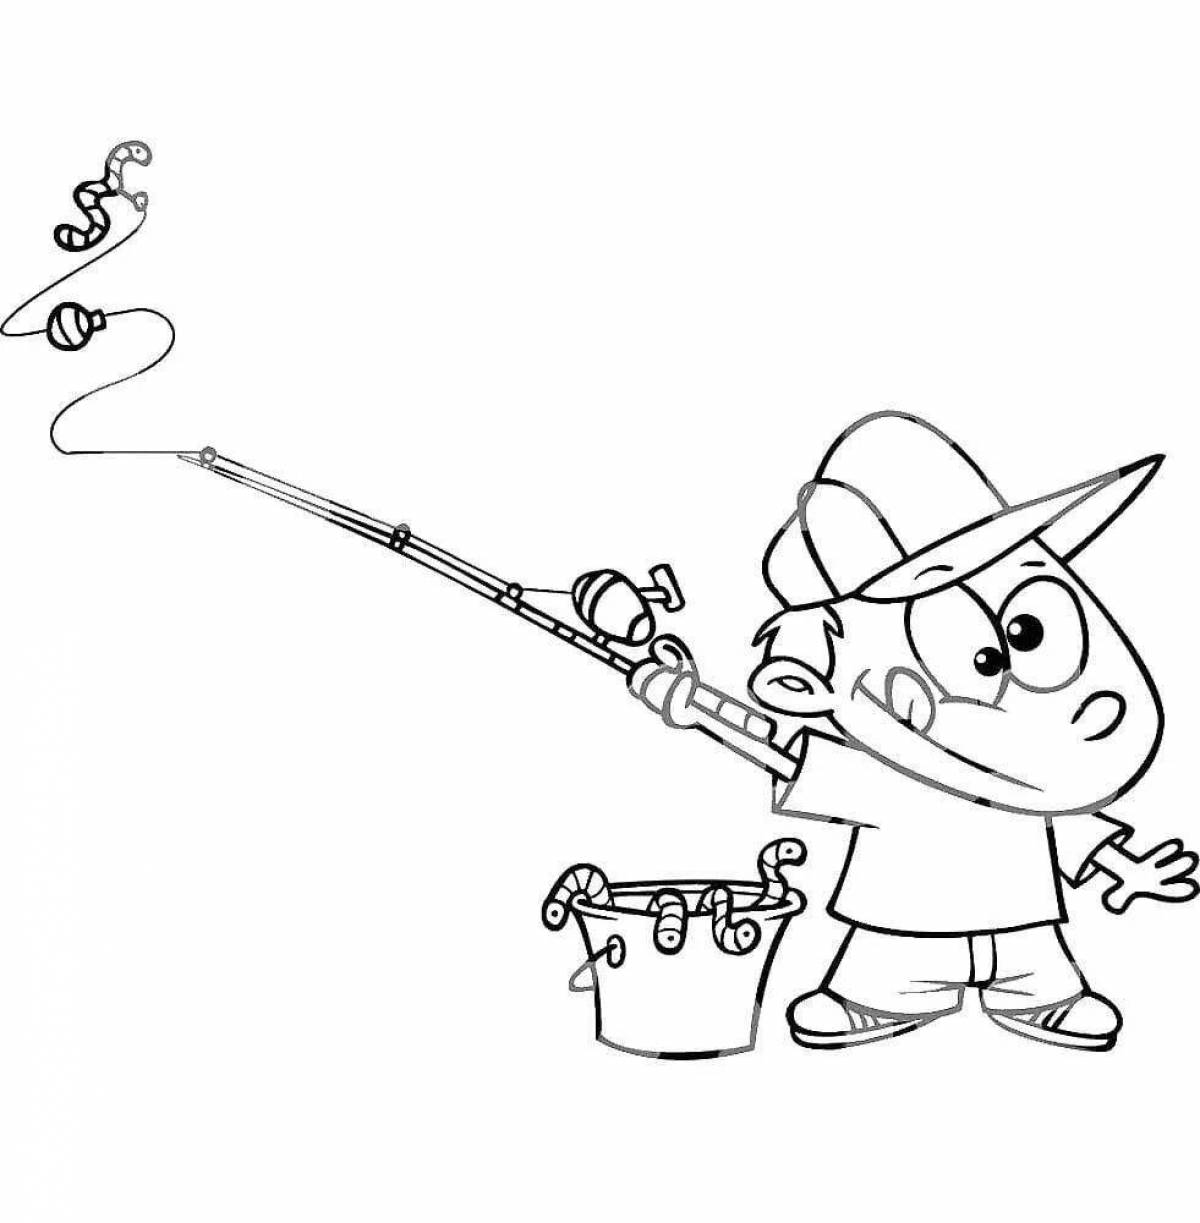 A fun fishing rod coloring book for kids